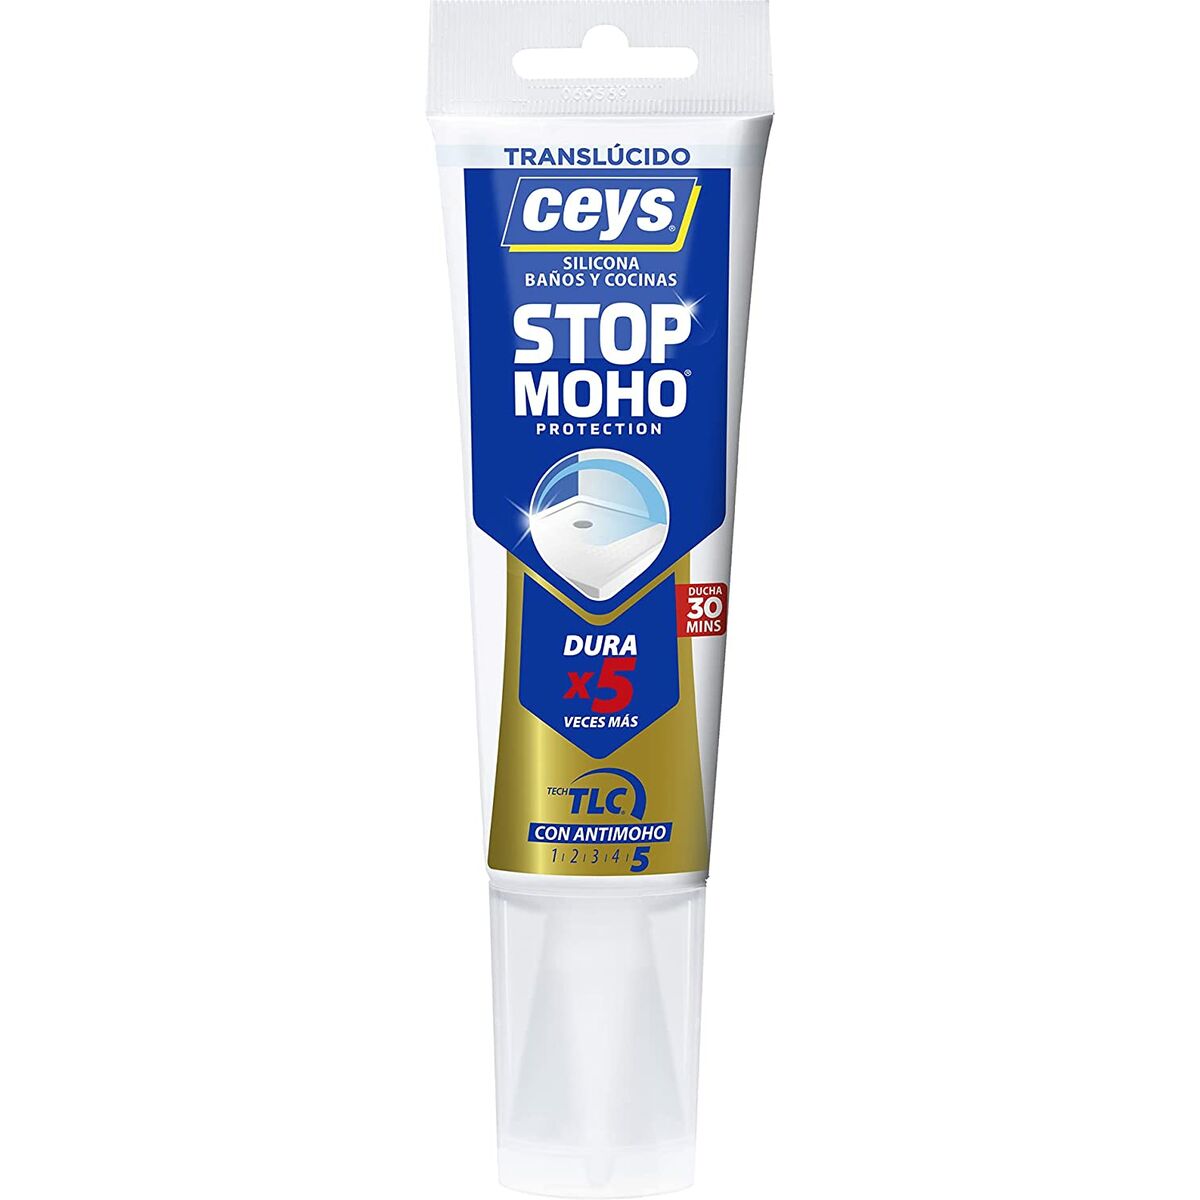 Silicone Ceys 125 ml Moss removal